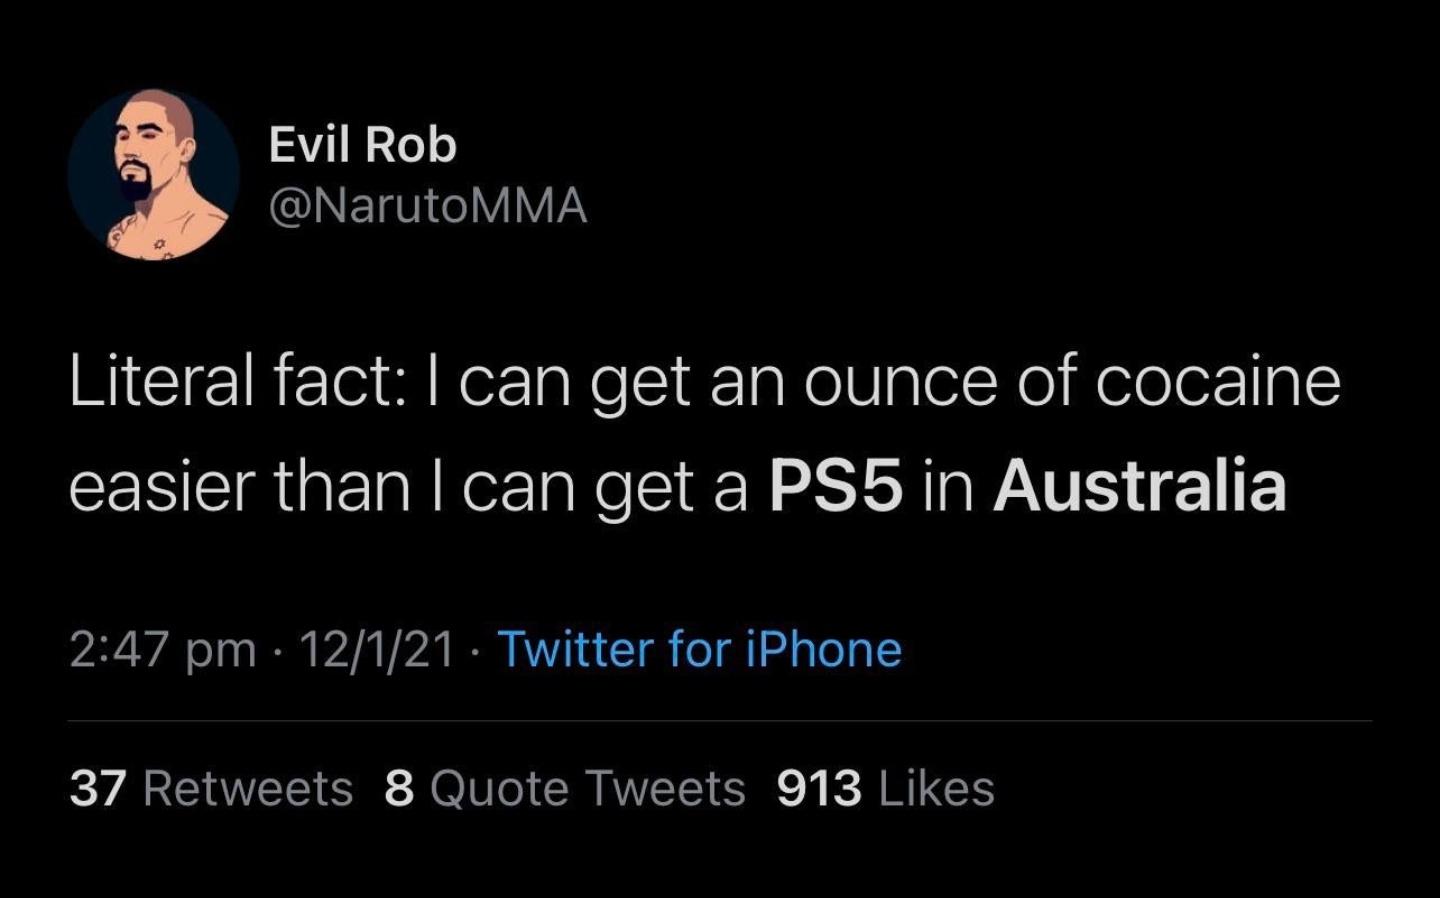 screenshot - Evil Rob Literal fact I can get an ounce of cocaine easier than I can get a PS5 in Australia 12121 Twitter for iPhone 37 8 Quote Tweets 913